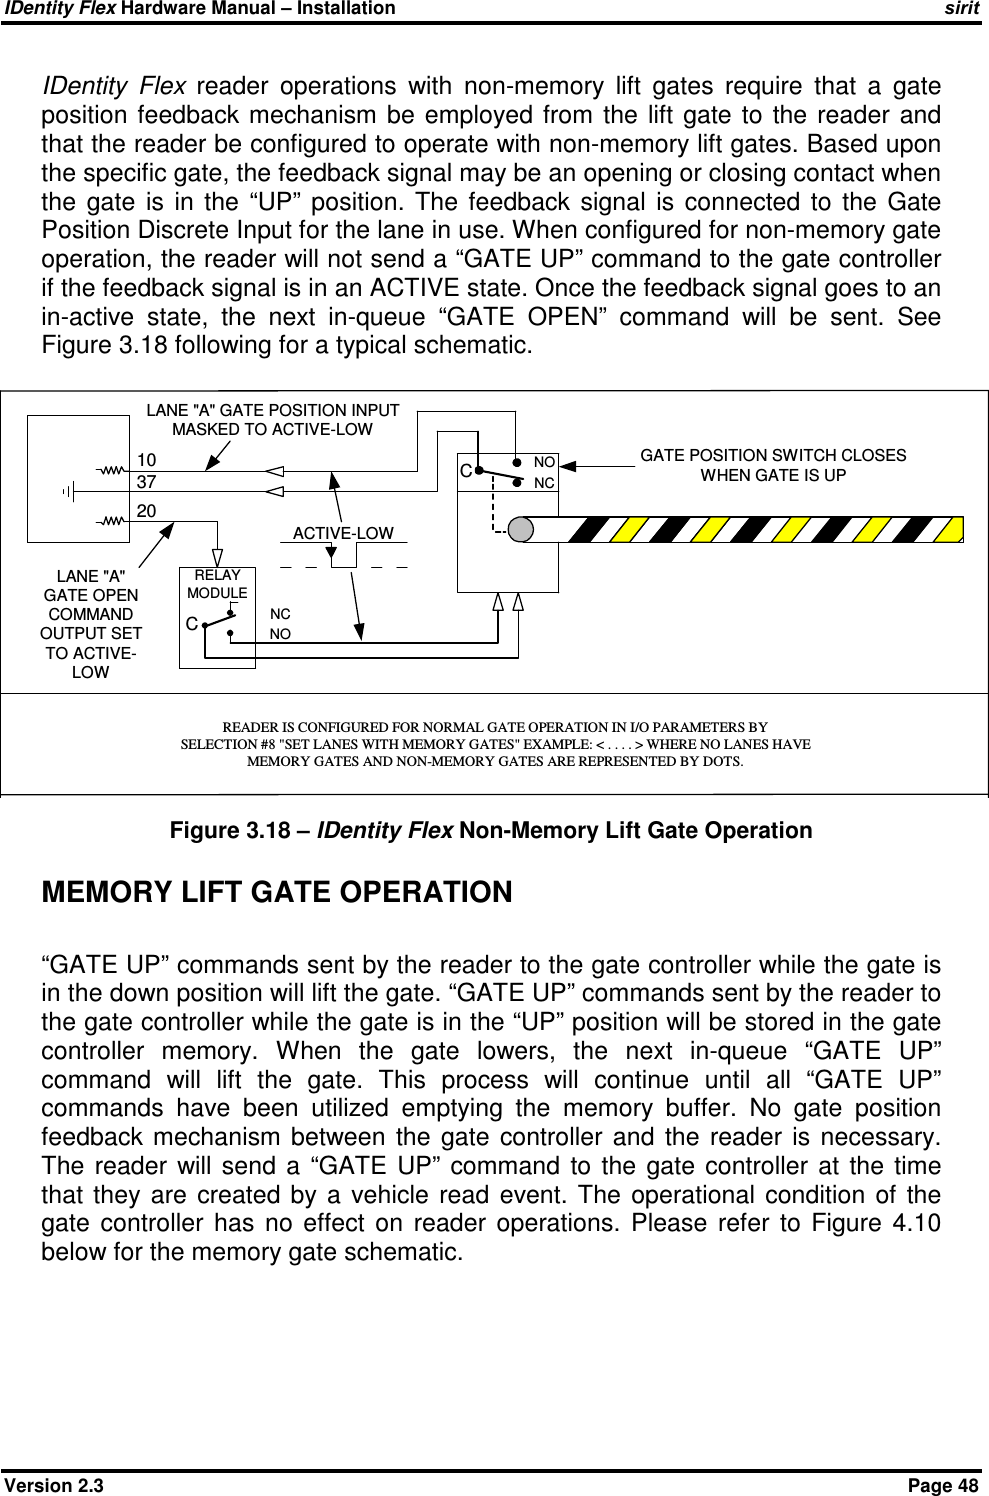 IDentity Flex Hardware Manual – Installation   sirit Version 2.3    Page 48 IDentity  Flex  reader  operations  with  non-memory  lift  gates  require  that  a  gate position  feedback  mechanism  be  employed  from  the lift  gate to  the reader  and that the reader be configured to operate with non-memory lift gates. Based upon the specific gate, the feedback signal may be an opening or closing contact when the  gate  is  in  the  “UP”  position.  The  feedback  signal  is  connected  to  the  Gate Position Discrete Input for the lane in use. When configured for non-memory gate operation, the reader will not send a “GATE UP” command to the gate controller if the feedback signal is in an ACTIVE state. Once the feedback signal goes to an in-active  state,  the  next  in-queue  “GATE  OPEN”  command  will  be  sent.  See Figure 3.18 following for a typical schematic. Figure 3.18 – IDentity Flex Non-Memory Lift Gate Operation MEMORY LIFT GATE OPERATION  “GATE UP” commands sent by the reader to the gate controller while the gate is in the down position will lift the gate. “GATE UP” commands sent by the reader to the gate controller while the gate is in the “UP” position will be stored in the gate controller  memory.  When  the  gate  lowers,  the  next  in-queue  “GATE  UP” command  will  lift  the  gate.  This  process  will  continue  until  all  “GATE  UP” commands  have  been  utilized  emptying  the  memory  buffer.  No  gate  position feedback  mechanism  between  the  gate  controller  and  the  reader  is  necessary. The  reader  will  send  a  “GATE  UP”  command  to  the  gate  controller  at  the  time that  they  are  created by  a  vehicle  read  event.  The  operational  condition  of  the gate  controller  has  no  effect  on  reader  operations.  Please  refer  to  Figure  4.10 below for the memory gate schematic.      NCNO103720CNONCCRELAYMODULELANE &quot;A&quot; GATE POSITION INPUTMASKED TO ACTIVE-LOWLANE &quot;A&quot;GATE OPENCOMMANDOUTPUT SETTO ACTIVE-LOWGATE POSITION SWITCH CLOSESWHEN GATE IS UPREADER IS CONFIGURED FOR NORMAL GATE OPERATION IN I/O PARAMETERS BYSELECTION #8 &quot;SET LANES WITH MEMORY GATES&quot; EXAMPLE: &lt; . . . . &gt; WHERE NO LANES HAVEMEMORY GATES AND NON-MEMORY GATES ARE REPRESENTED BY DOTS.ACTIVE-LOW